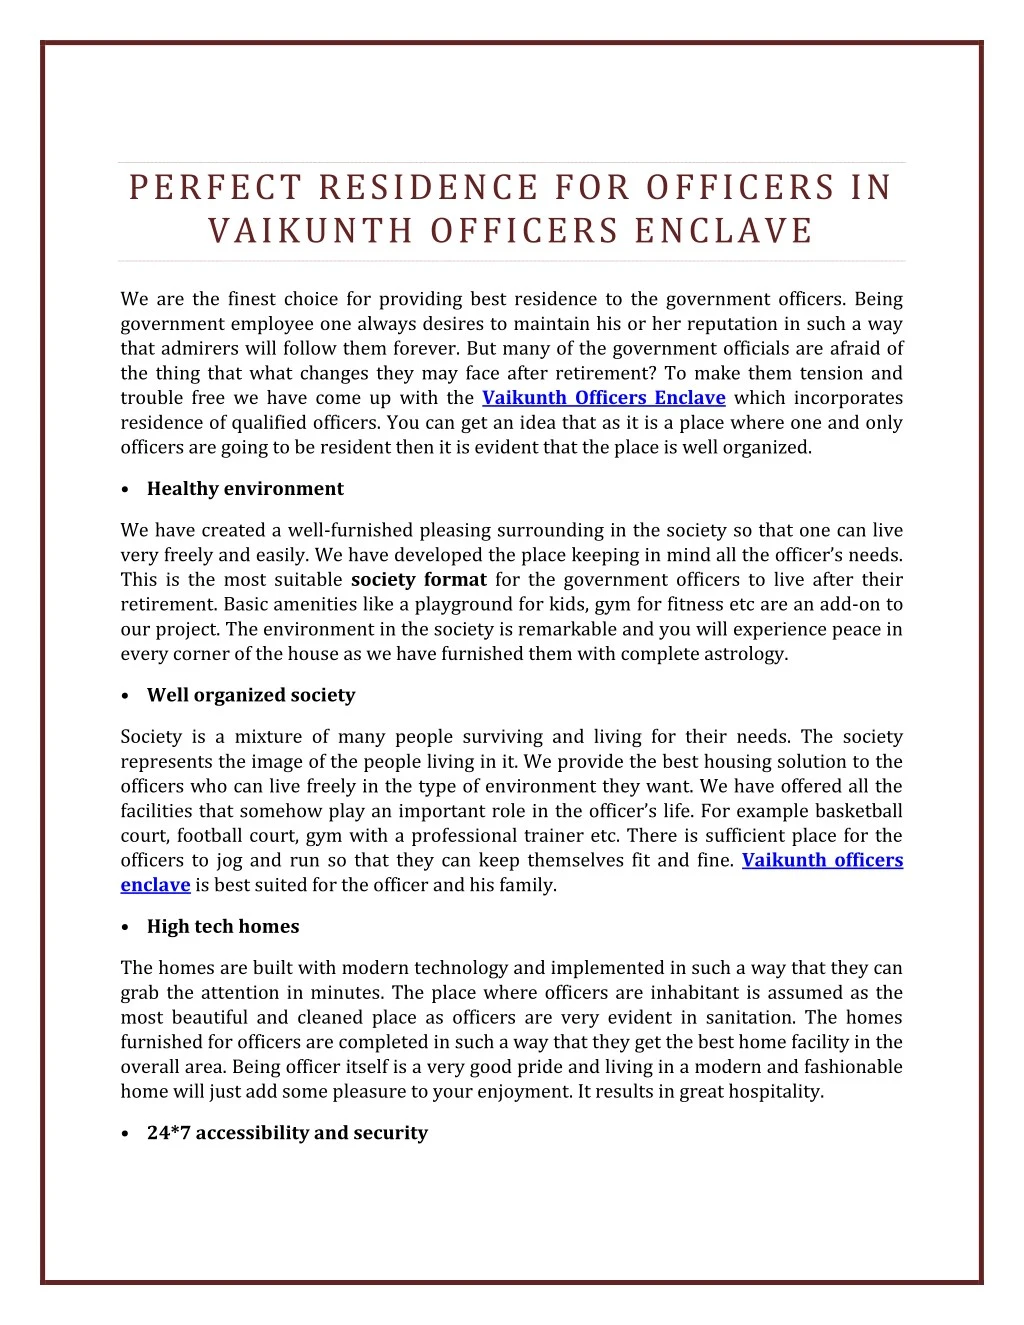 perfect residence for officers in vaikunth